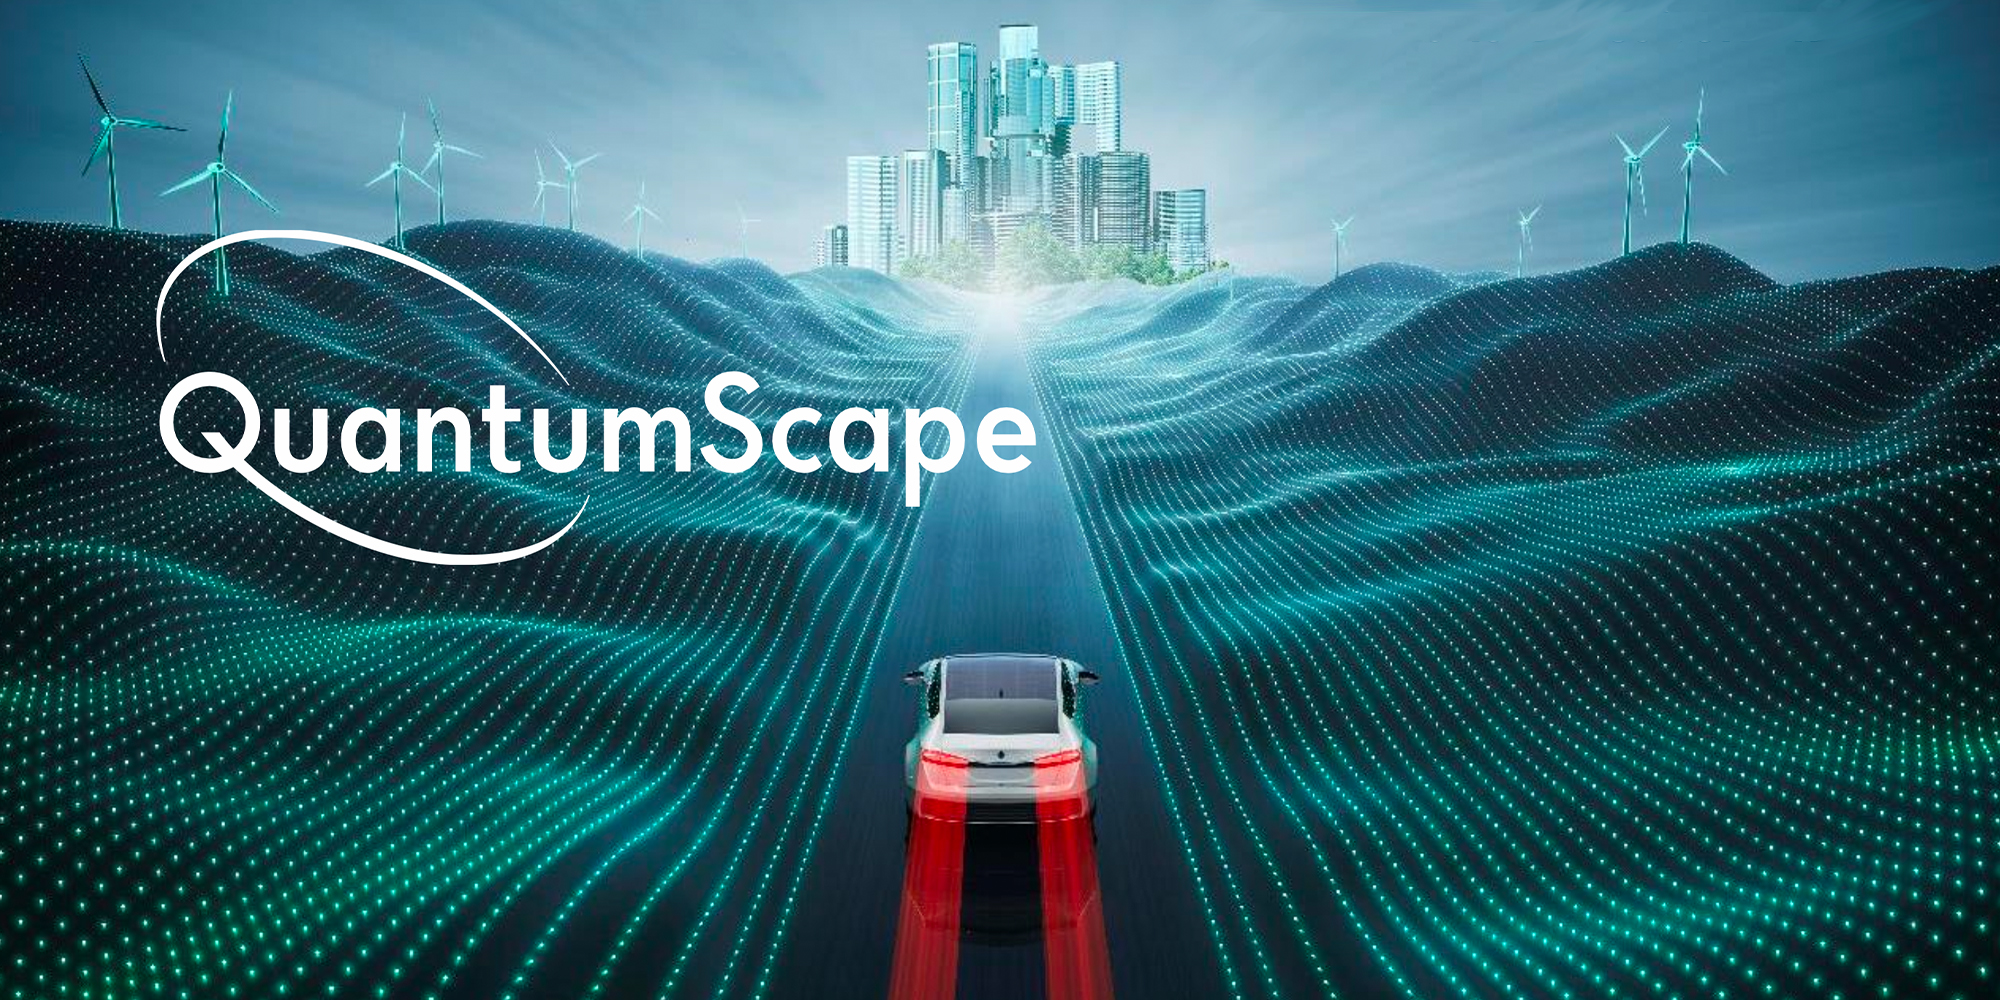 Quantumscape has shared new data showcasing further development of its solid-state batteries, whose cells have completed 400 consecutive 15-minute fast-charge cycles, replenishing from 10% to 80% capacity while still retaining over 80% of the initial ener